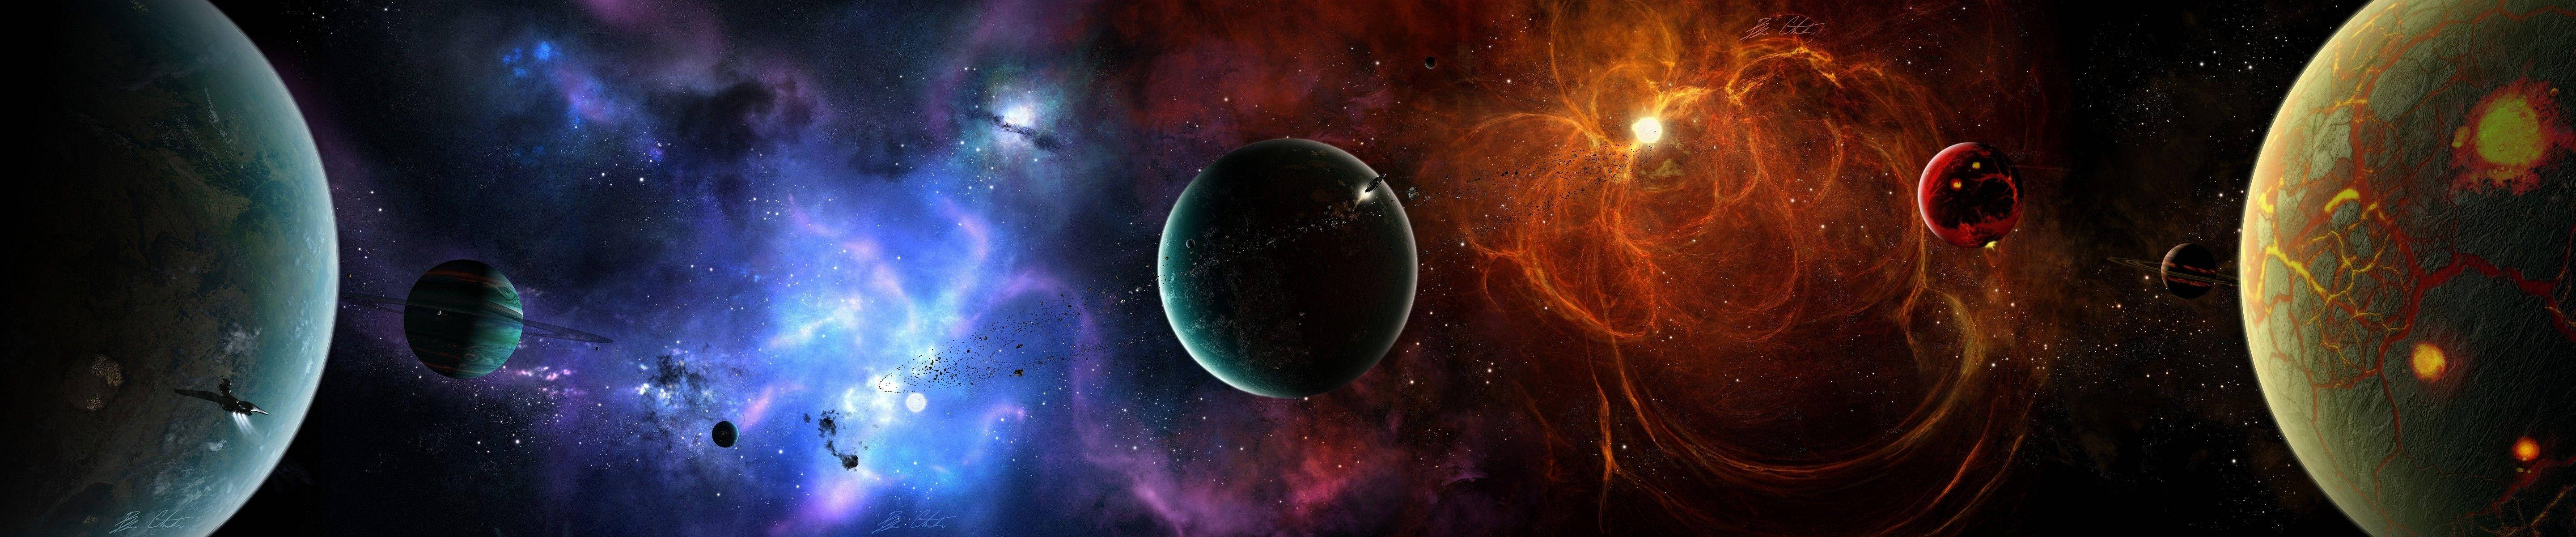 Planets In Space Three Screen Wallpaper